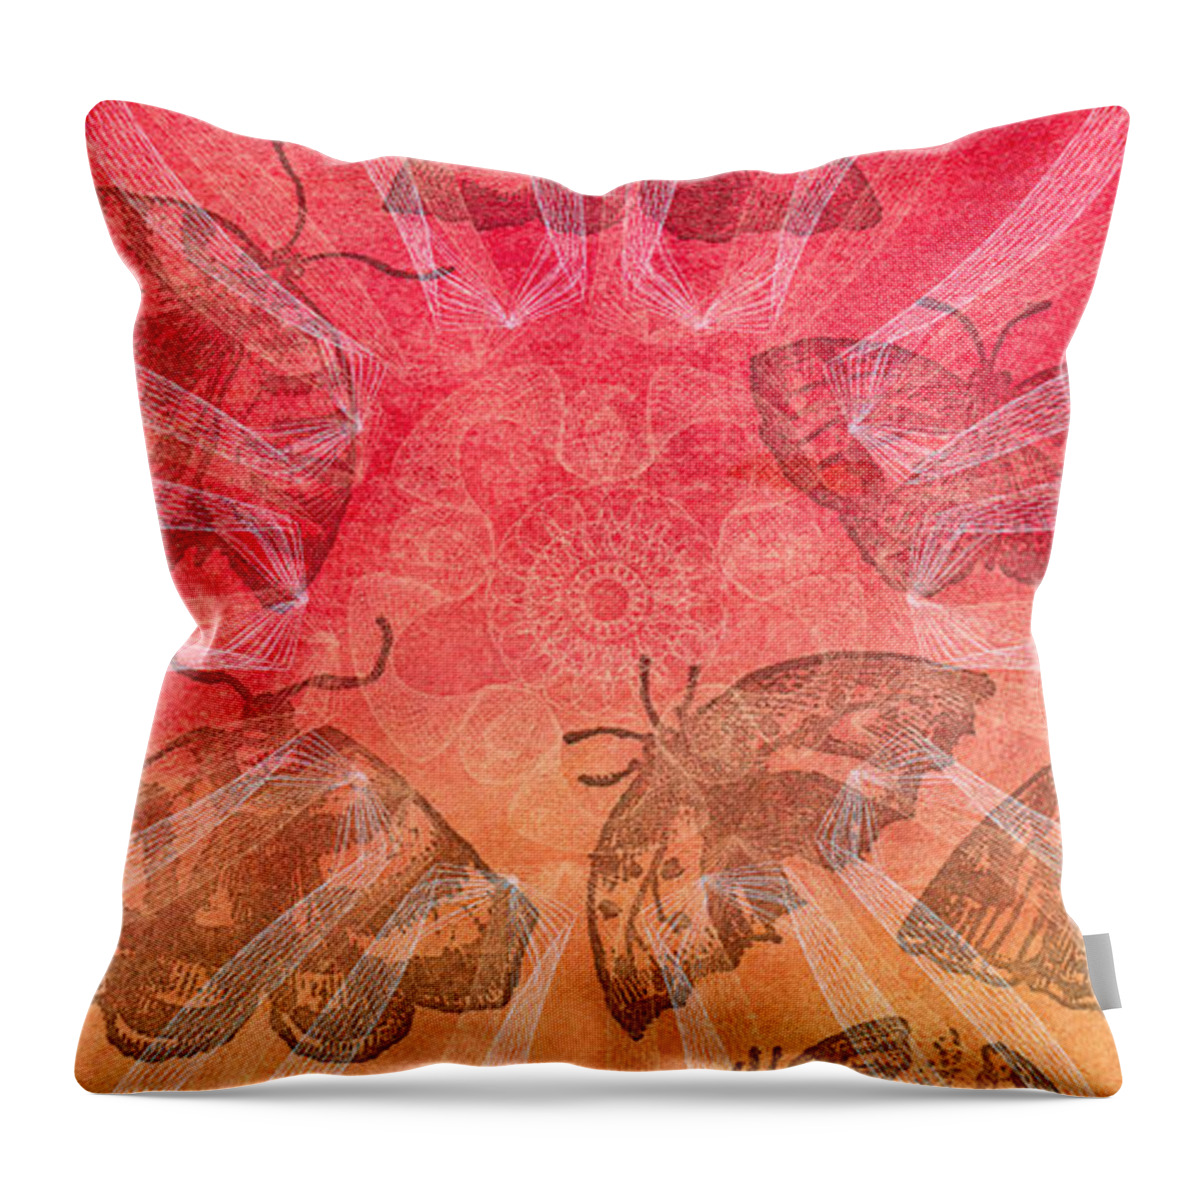 Butterfly Throw Pillow featuring the digital art Butterfly Letterpress Watercolor by Kyle Hanson